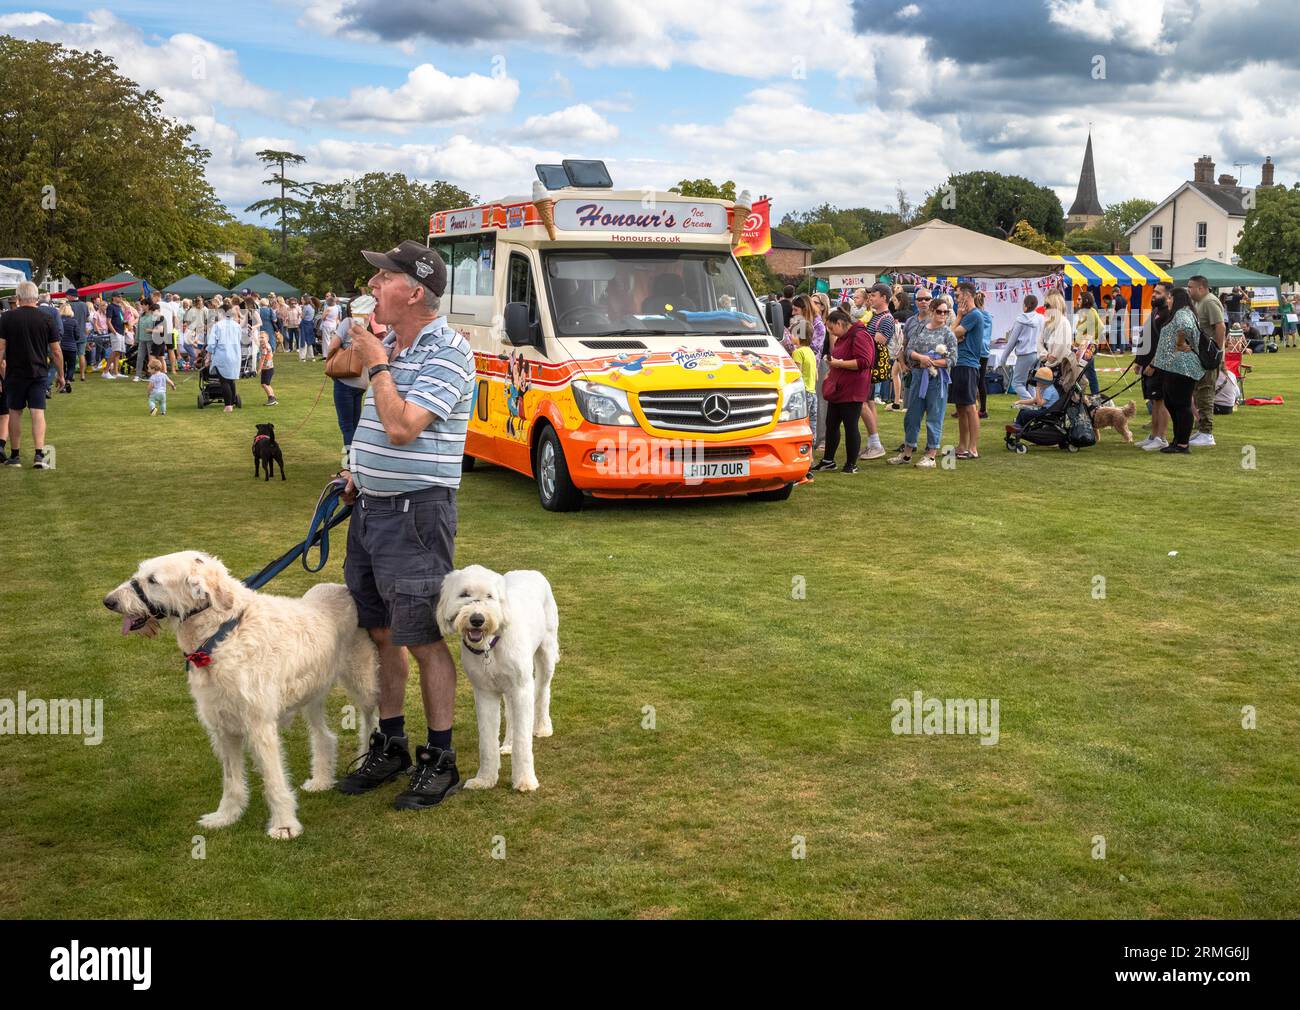 Man with holding two white dogs on leads eats an ice cream next to an ice cream van at  Wisborough Green Village Fete, West Sussex, UK Stock Photo